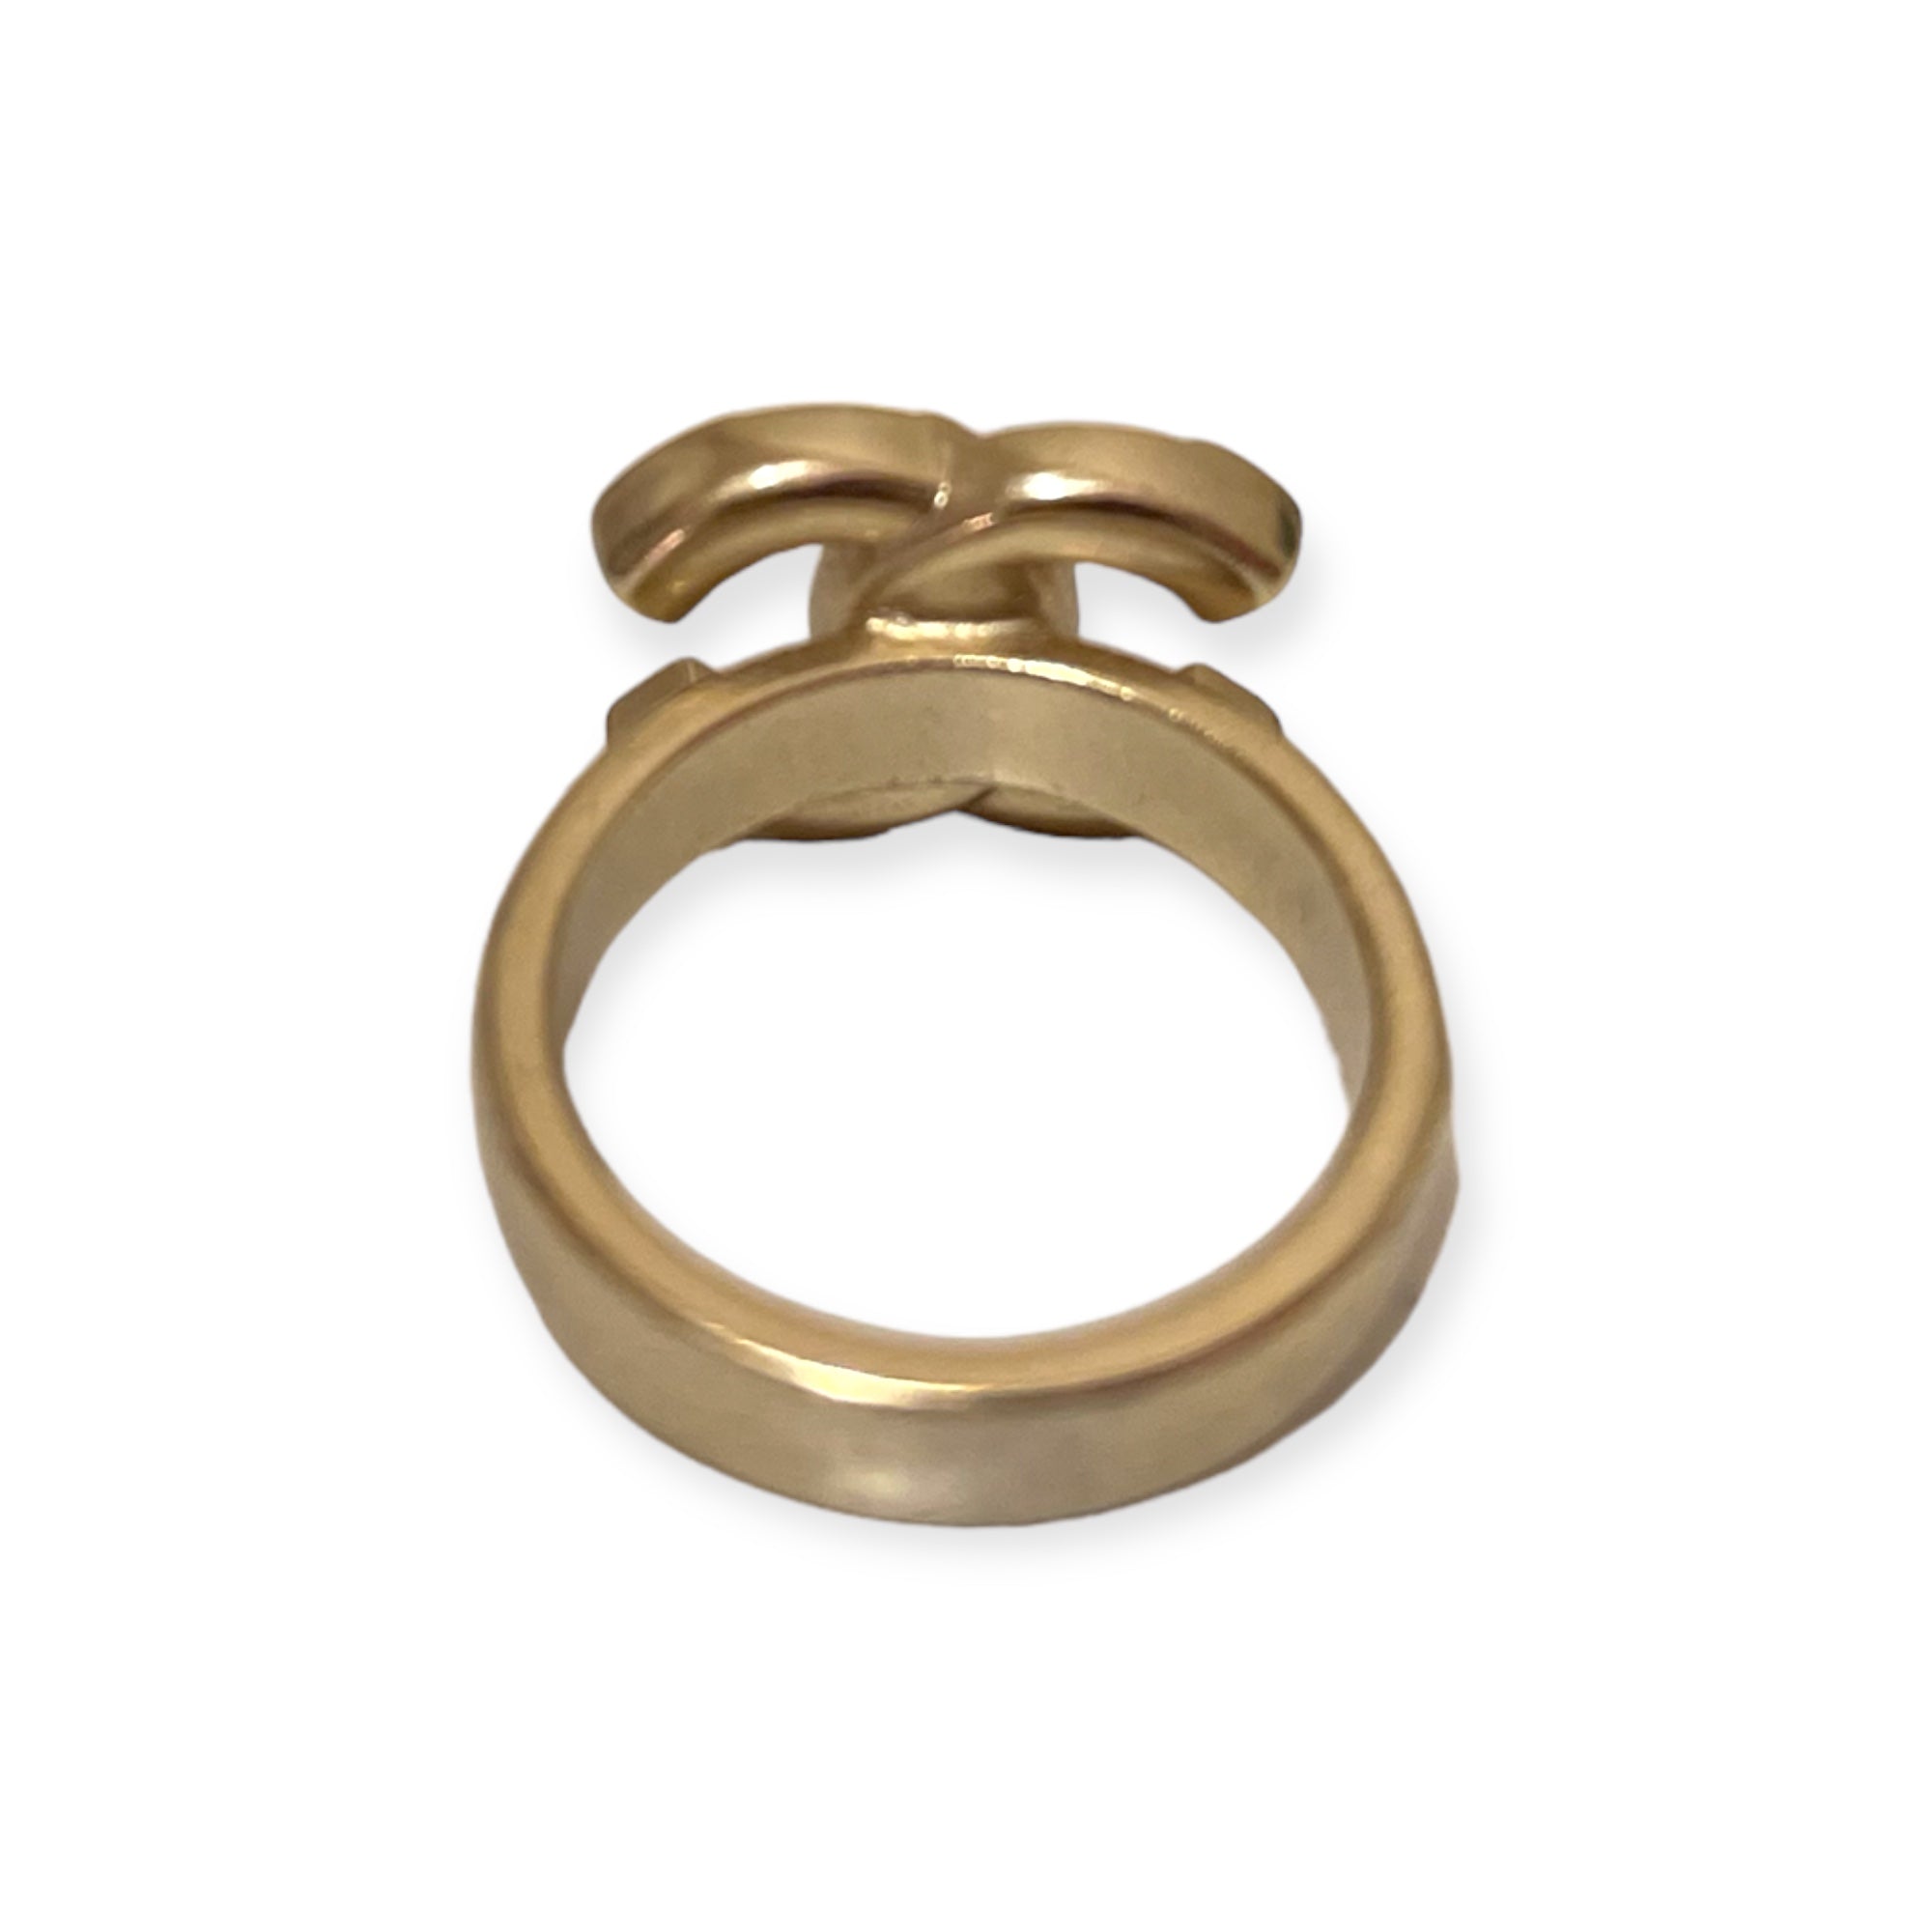 CHANEL CC Logo Ring in Champagne Gold/Crystals & Baguettes |Size:6|